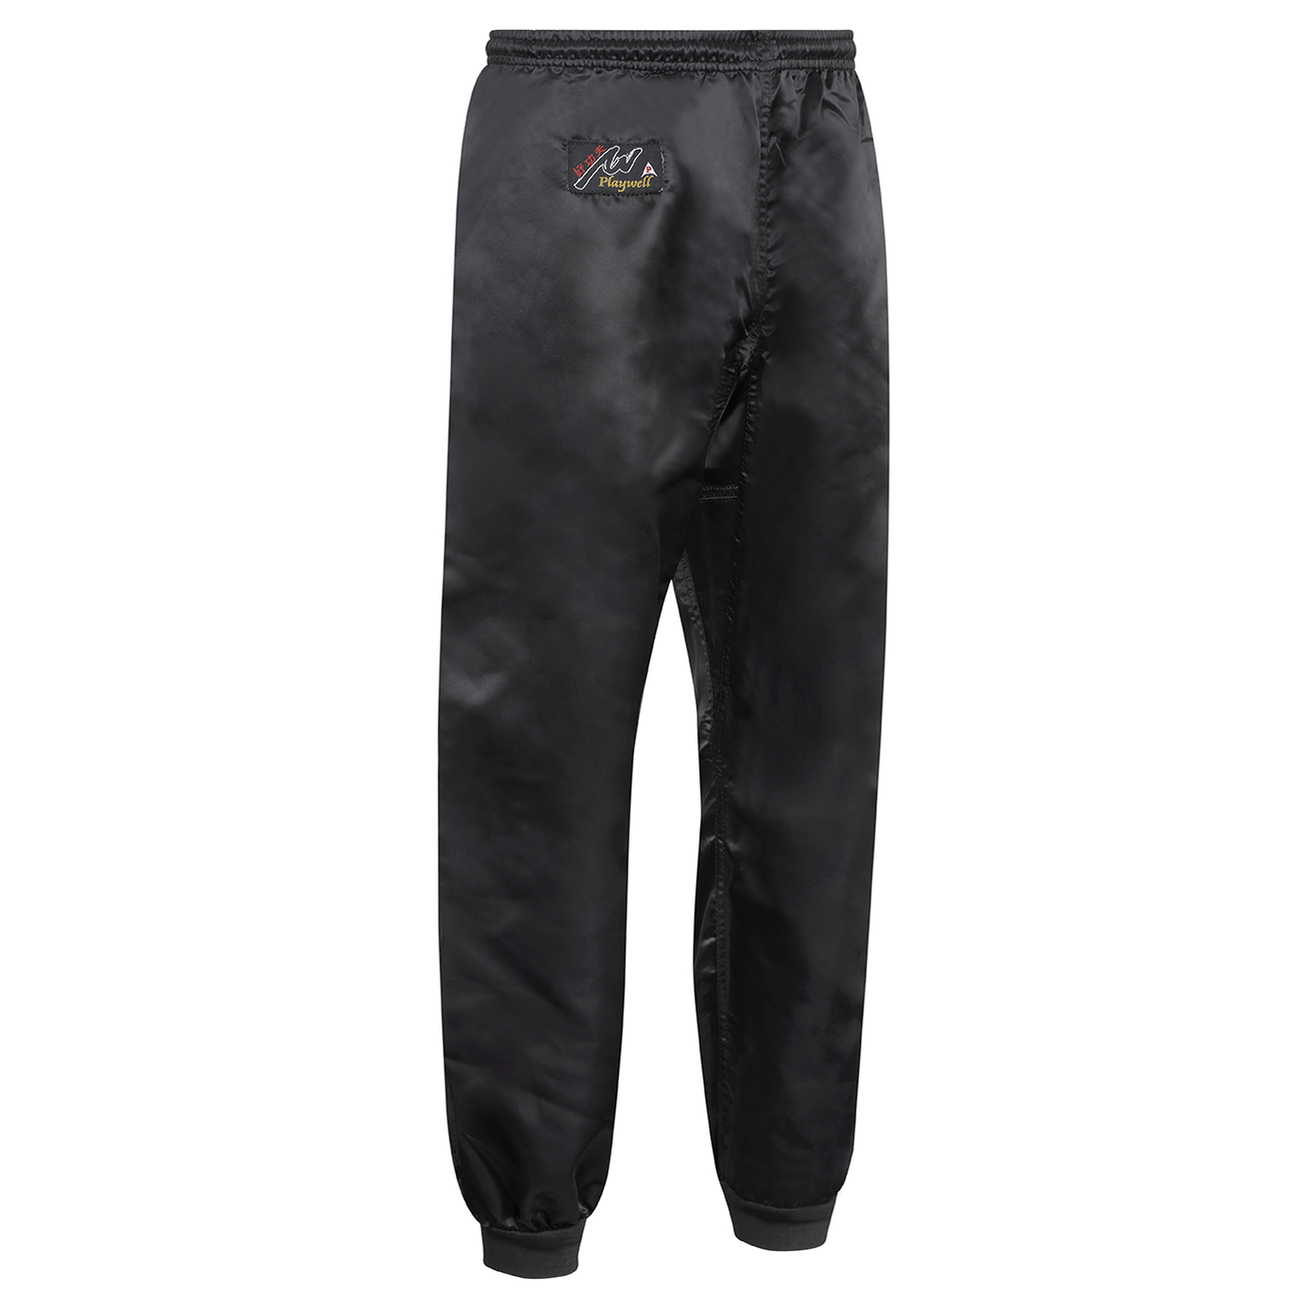 Kung Fu Trousers: Black Satin - Click Image to Close